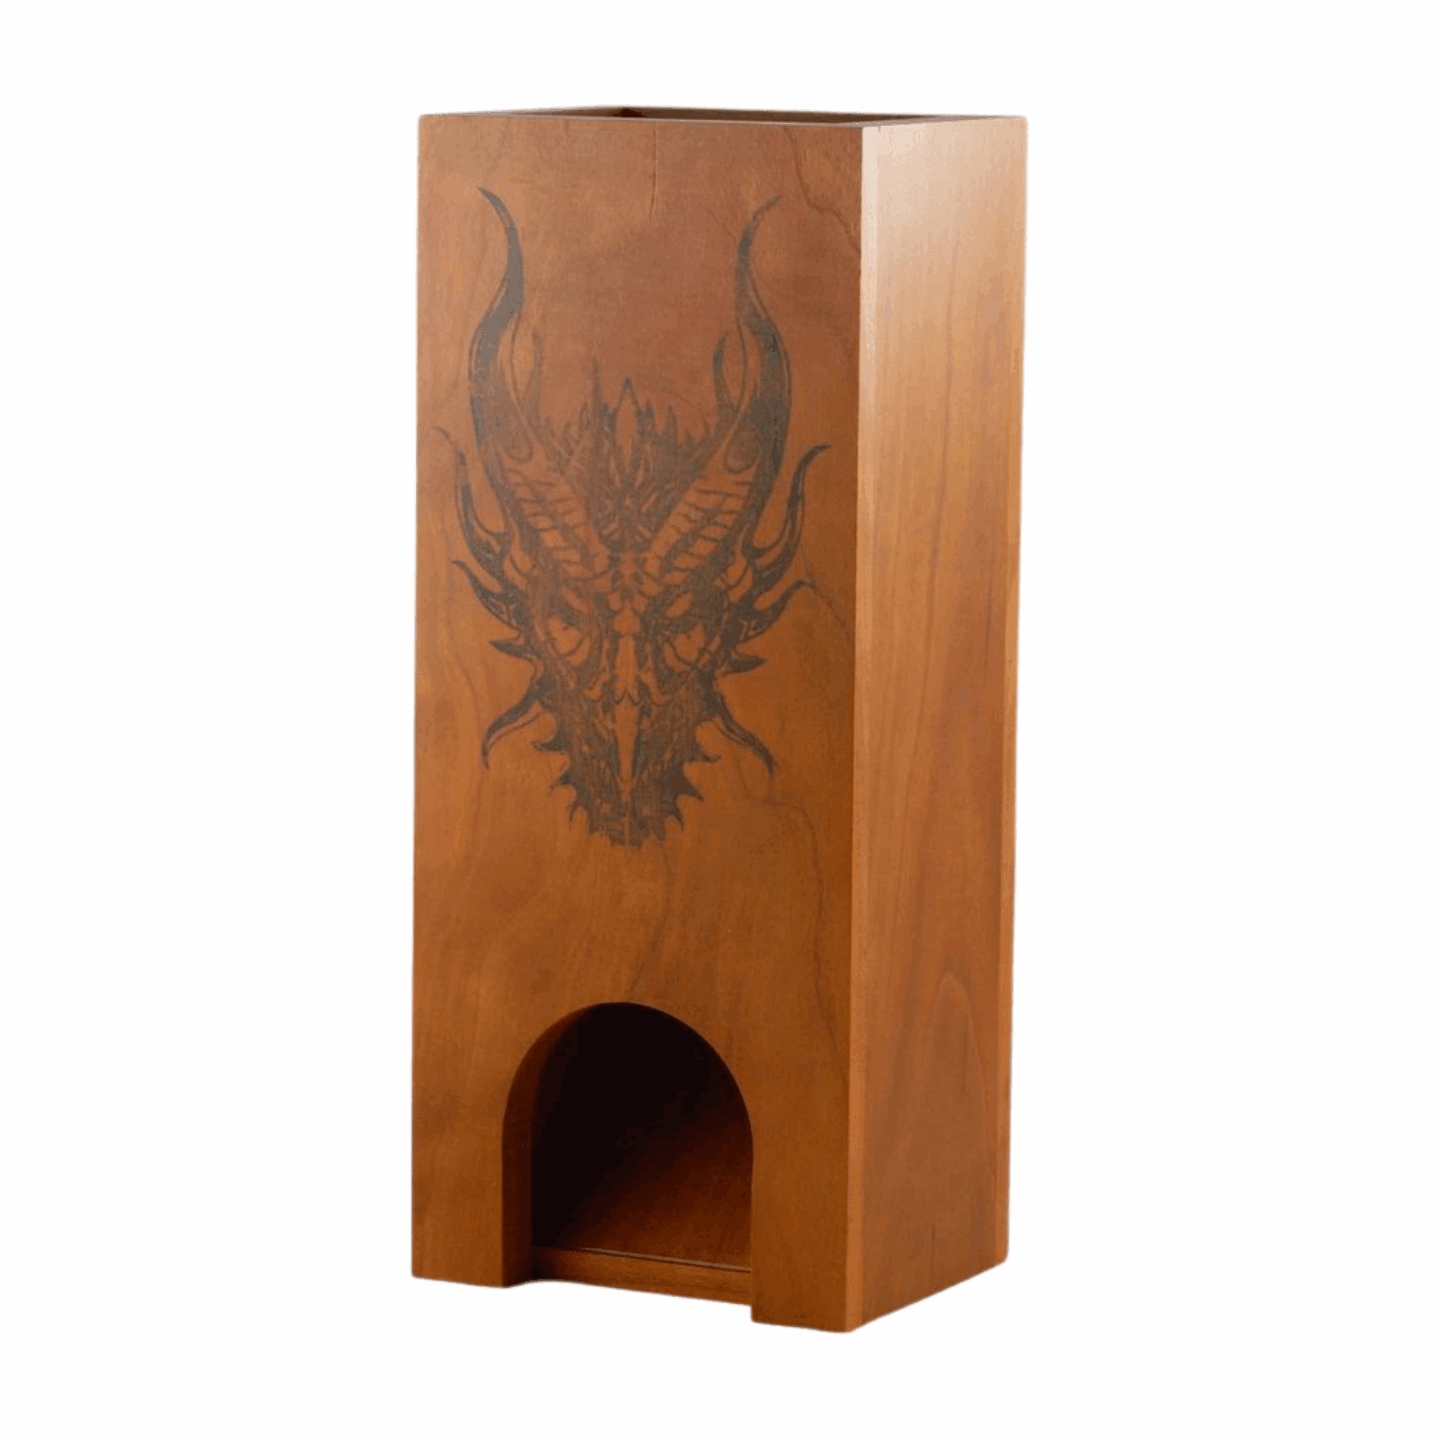 Cherry Dice Tower with Dragon Design - Dragon Armor Games